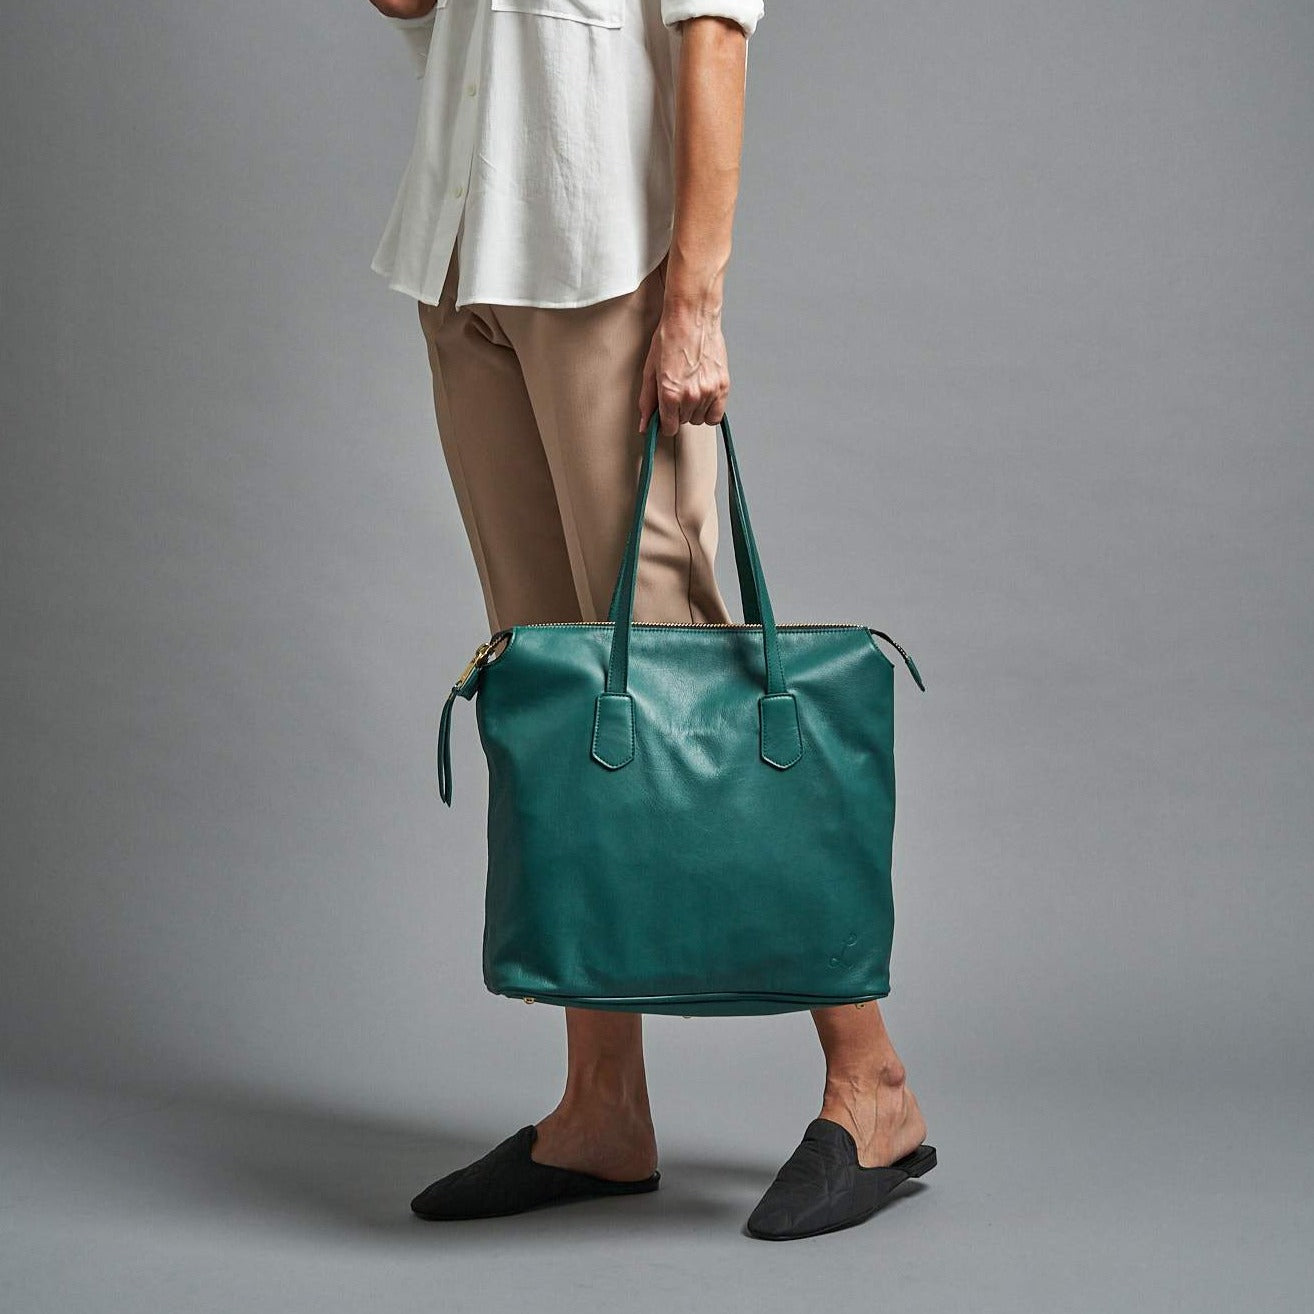 Make My Day Tote - Teal